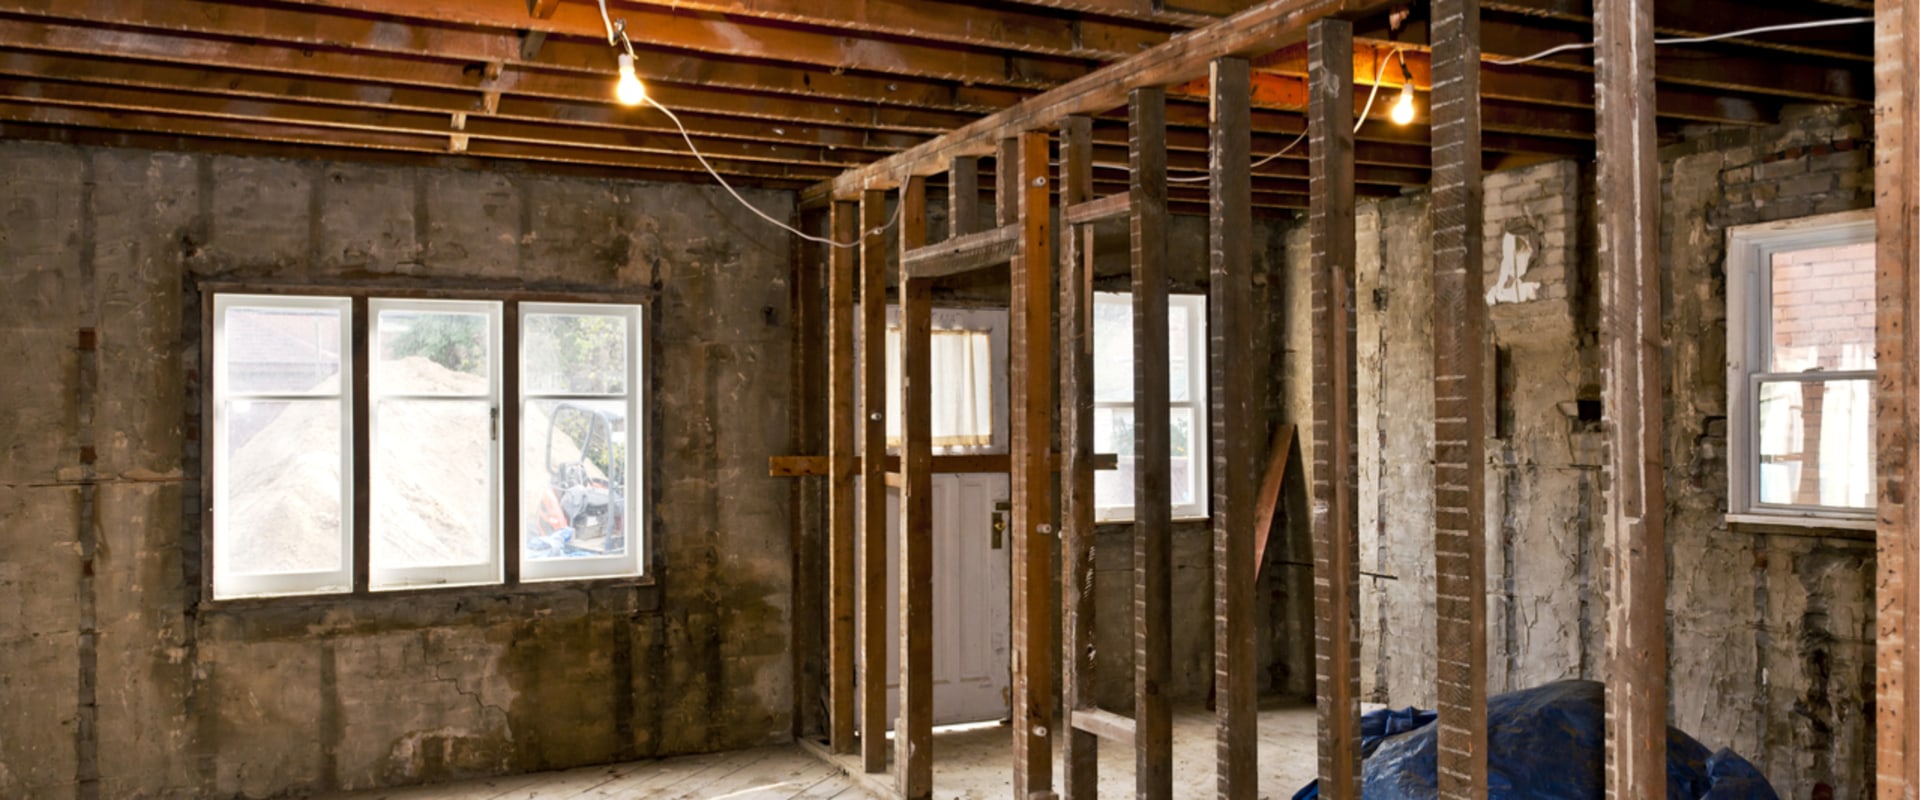 Rebuilding or Remodeling a House: Which is Cheaper?